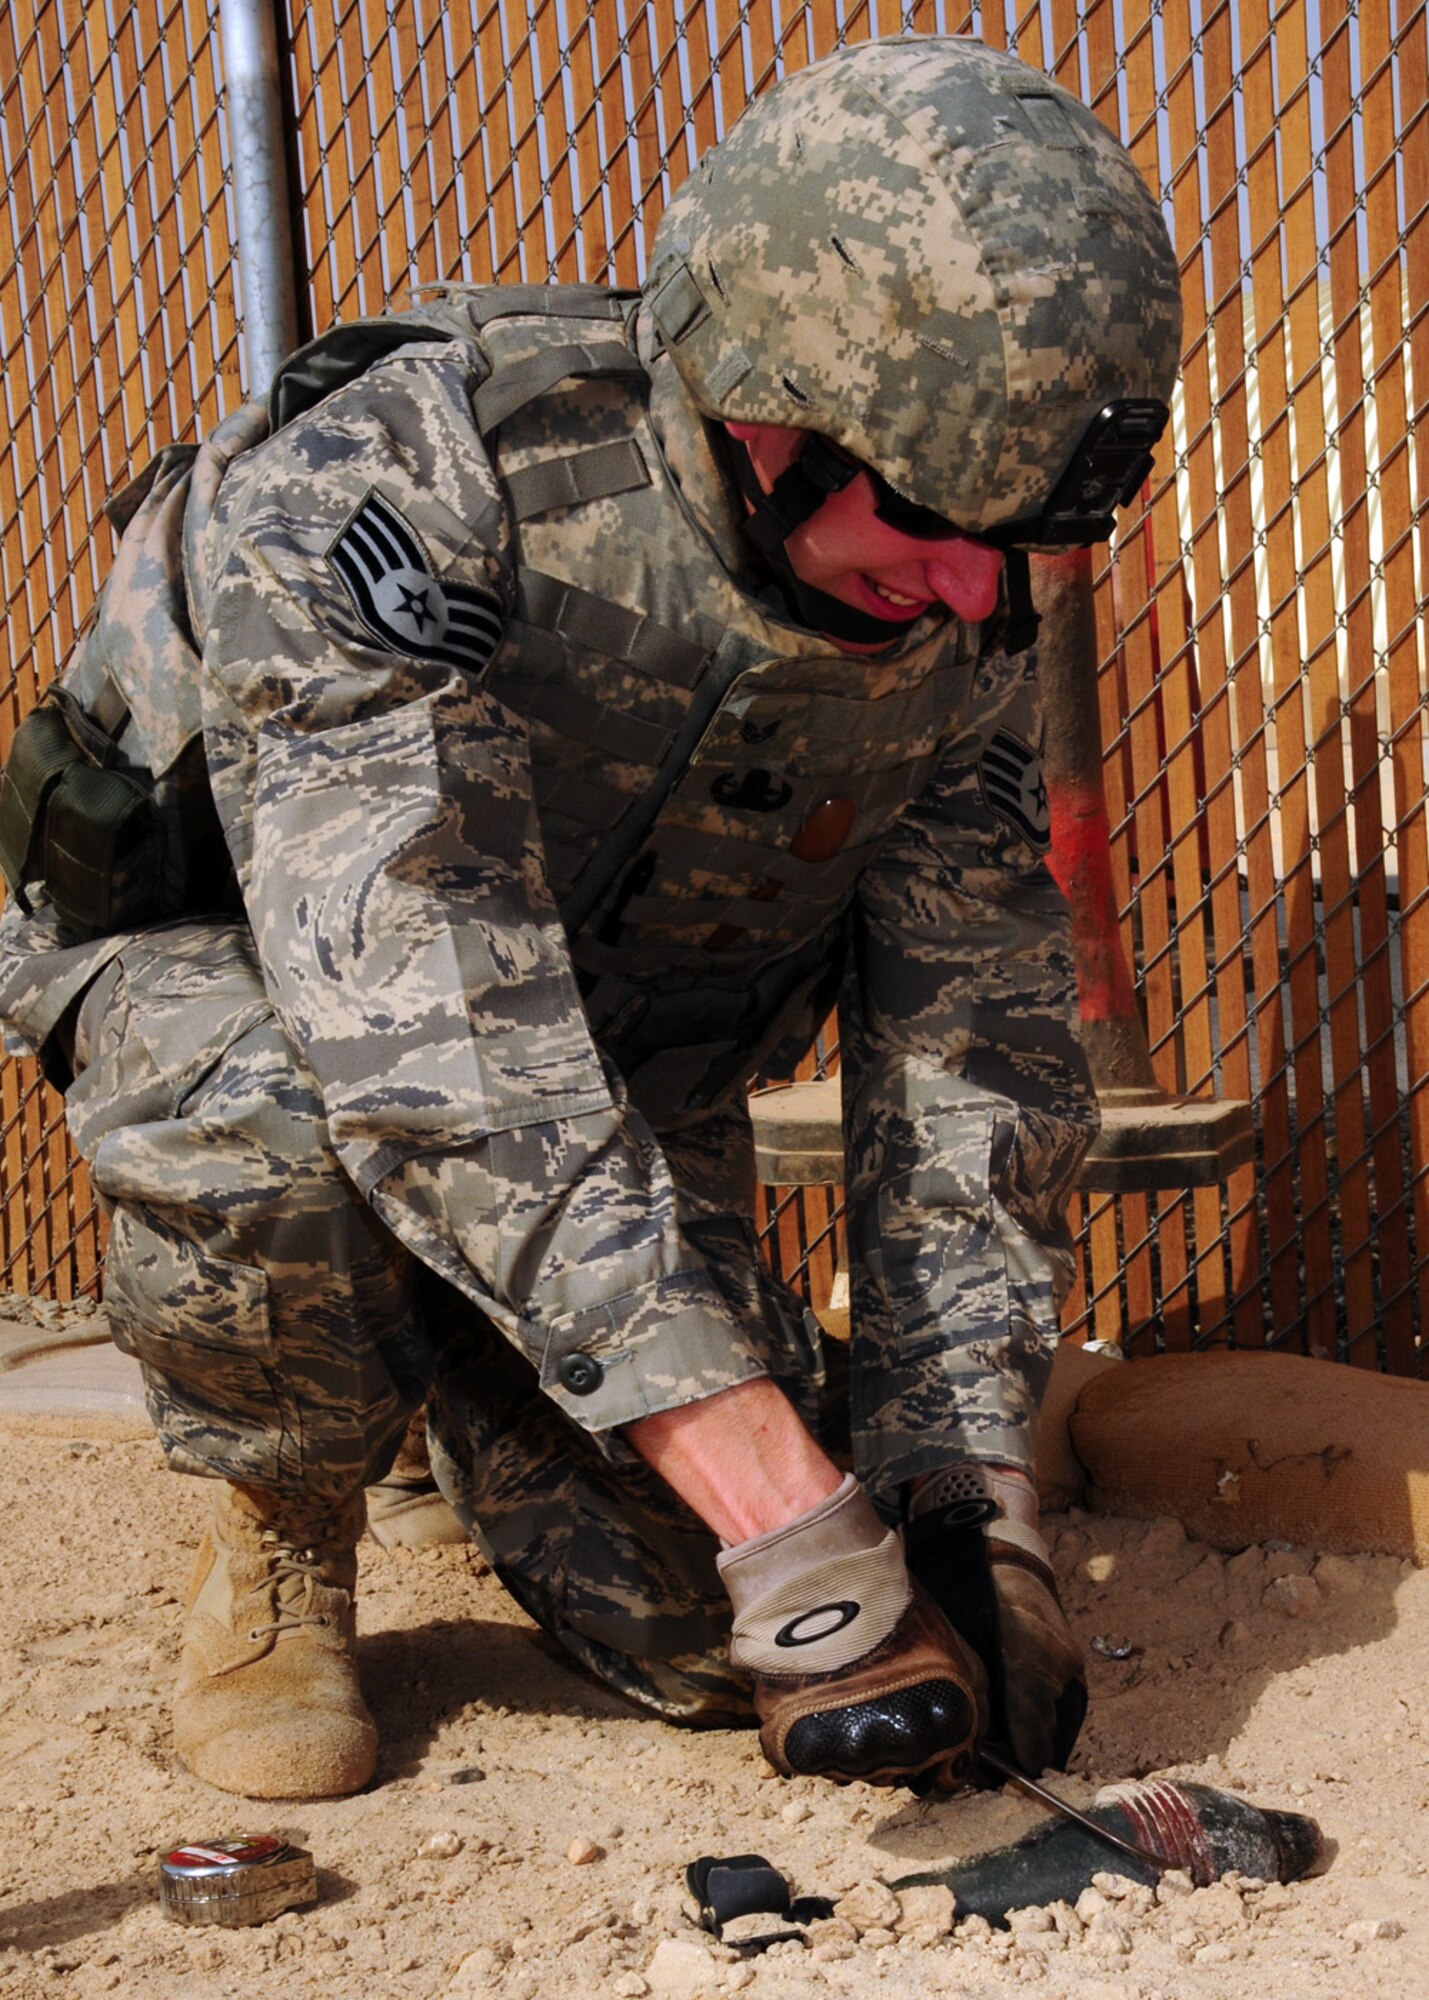 SOUTHWEST ASIA -- Staff Sgt. Brian Dube, 386th Expeditionary Civil Engineer Squadron explosive ordnance disposal, uses a caliper to measure the diameter of a simulated unexploded ordnance for positive identification purposes during training at an air base in Southwest Asia, May 27. Once the UXO is measured, the caliper is then removed and the distance is read by measuring between the tips with a measuring tool, such as a ruler. Sergeant Dube is deployed from Nellis Air Force Base, Nev., and is originally from Torrington, Conn. (U.S. Air Force photo/ Senior Airman Courtney Richardson)